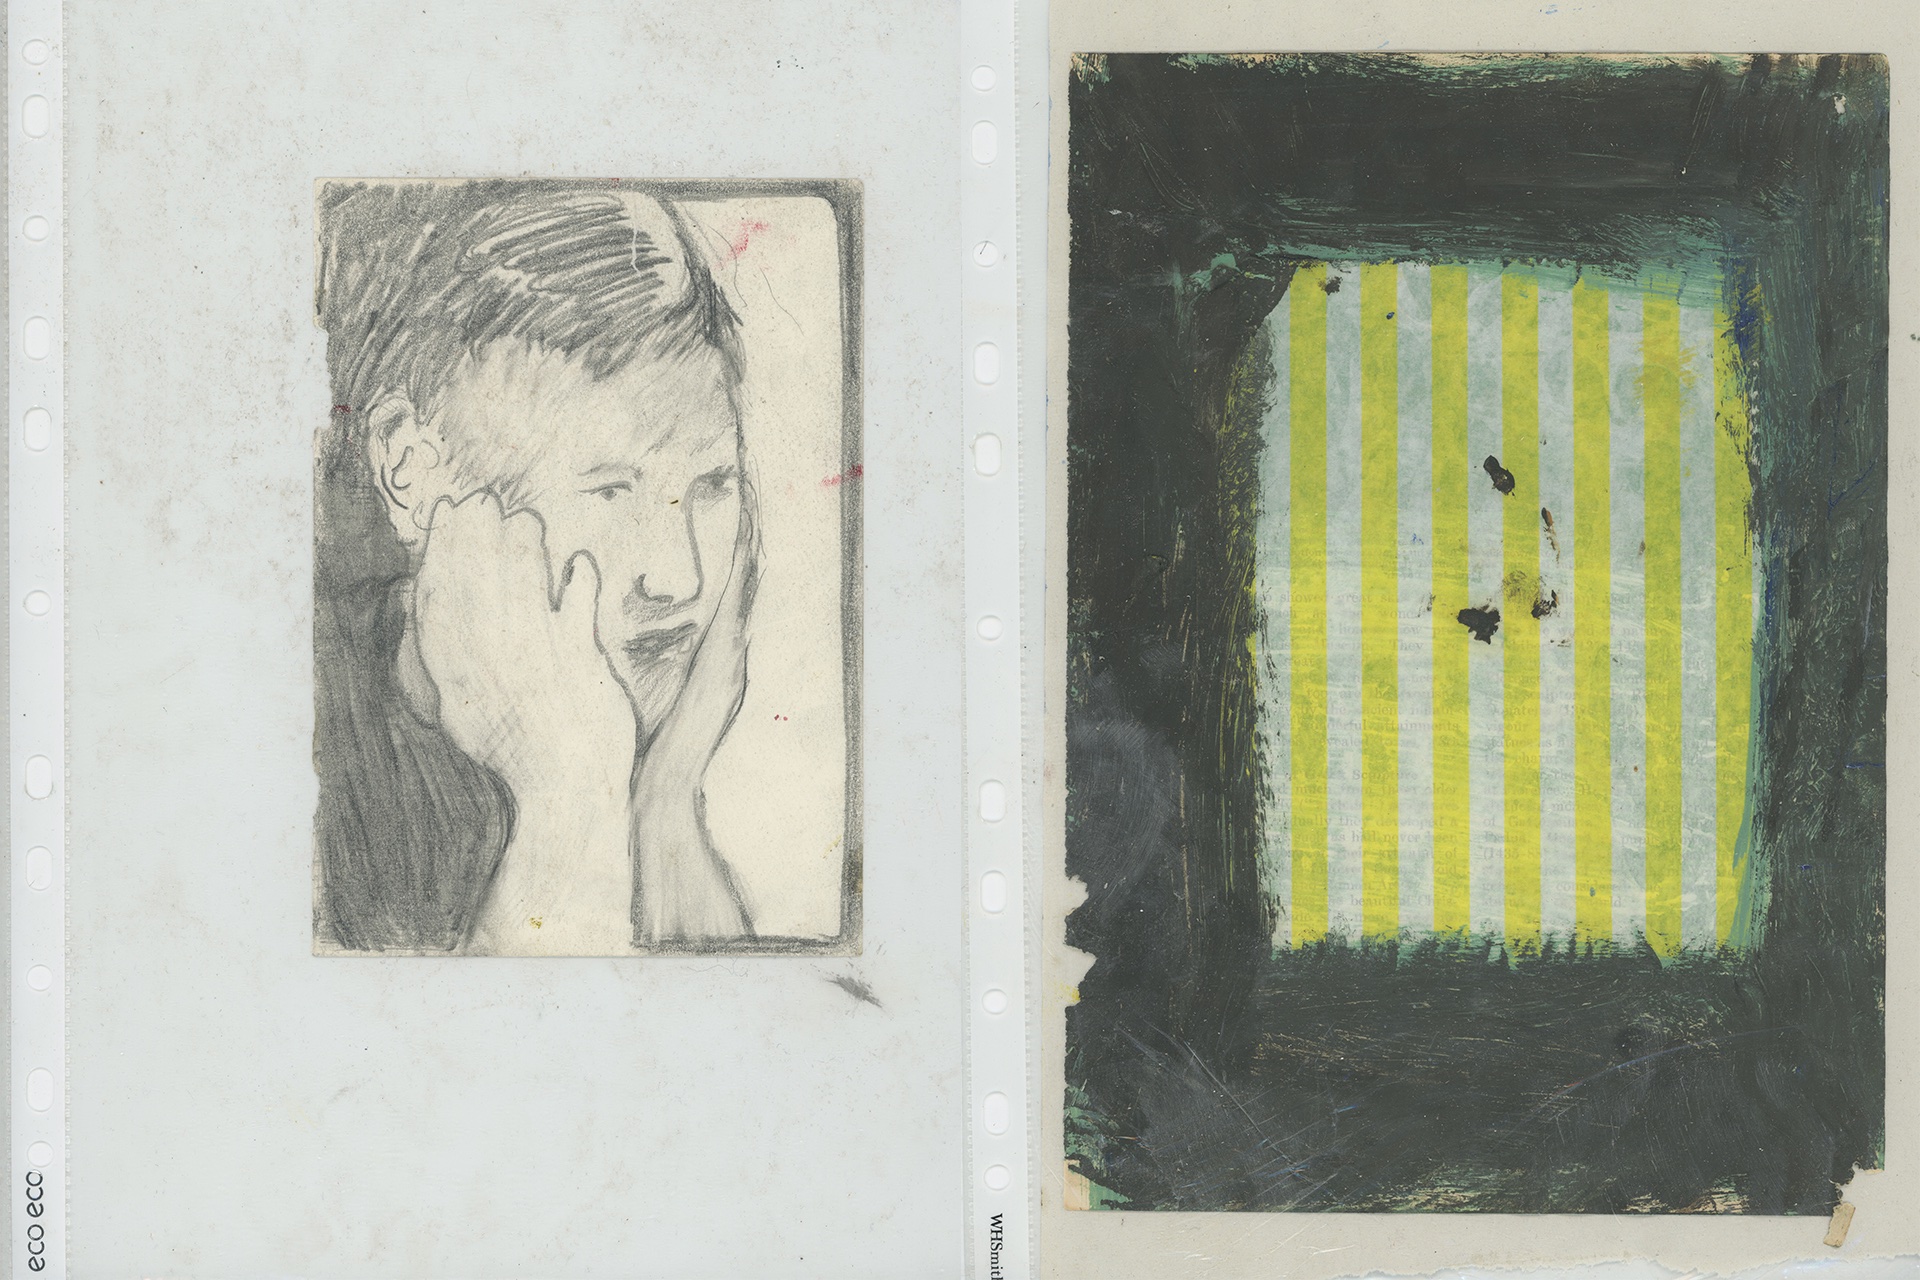 Two scans of works on paper. On the left a portrait of a man with his head in his hands and on the right a painted yellow paper bag with a black and green border.